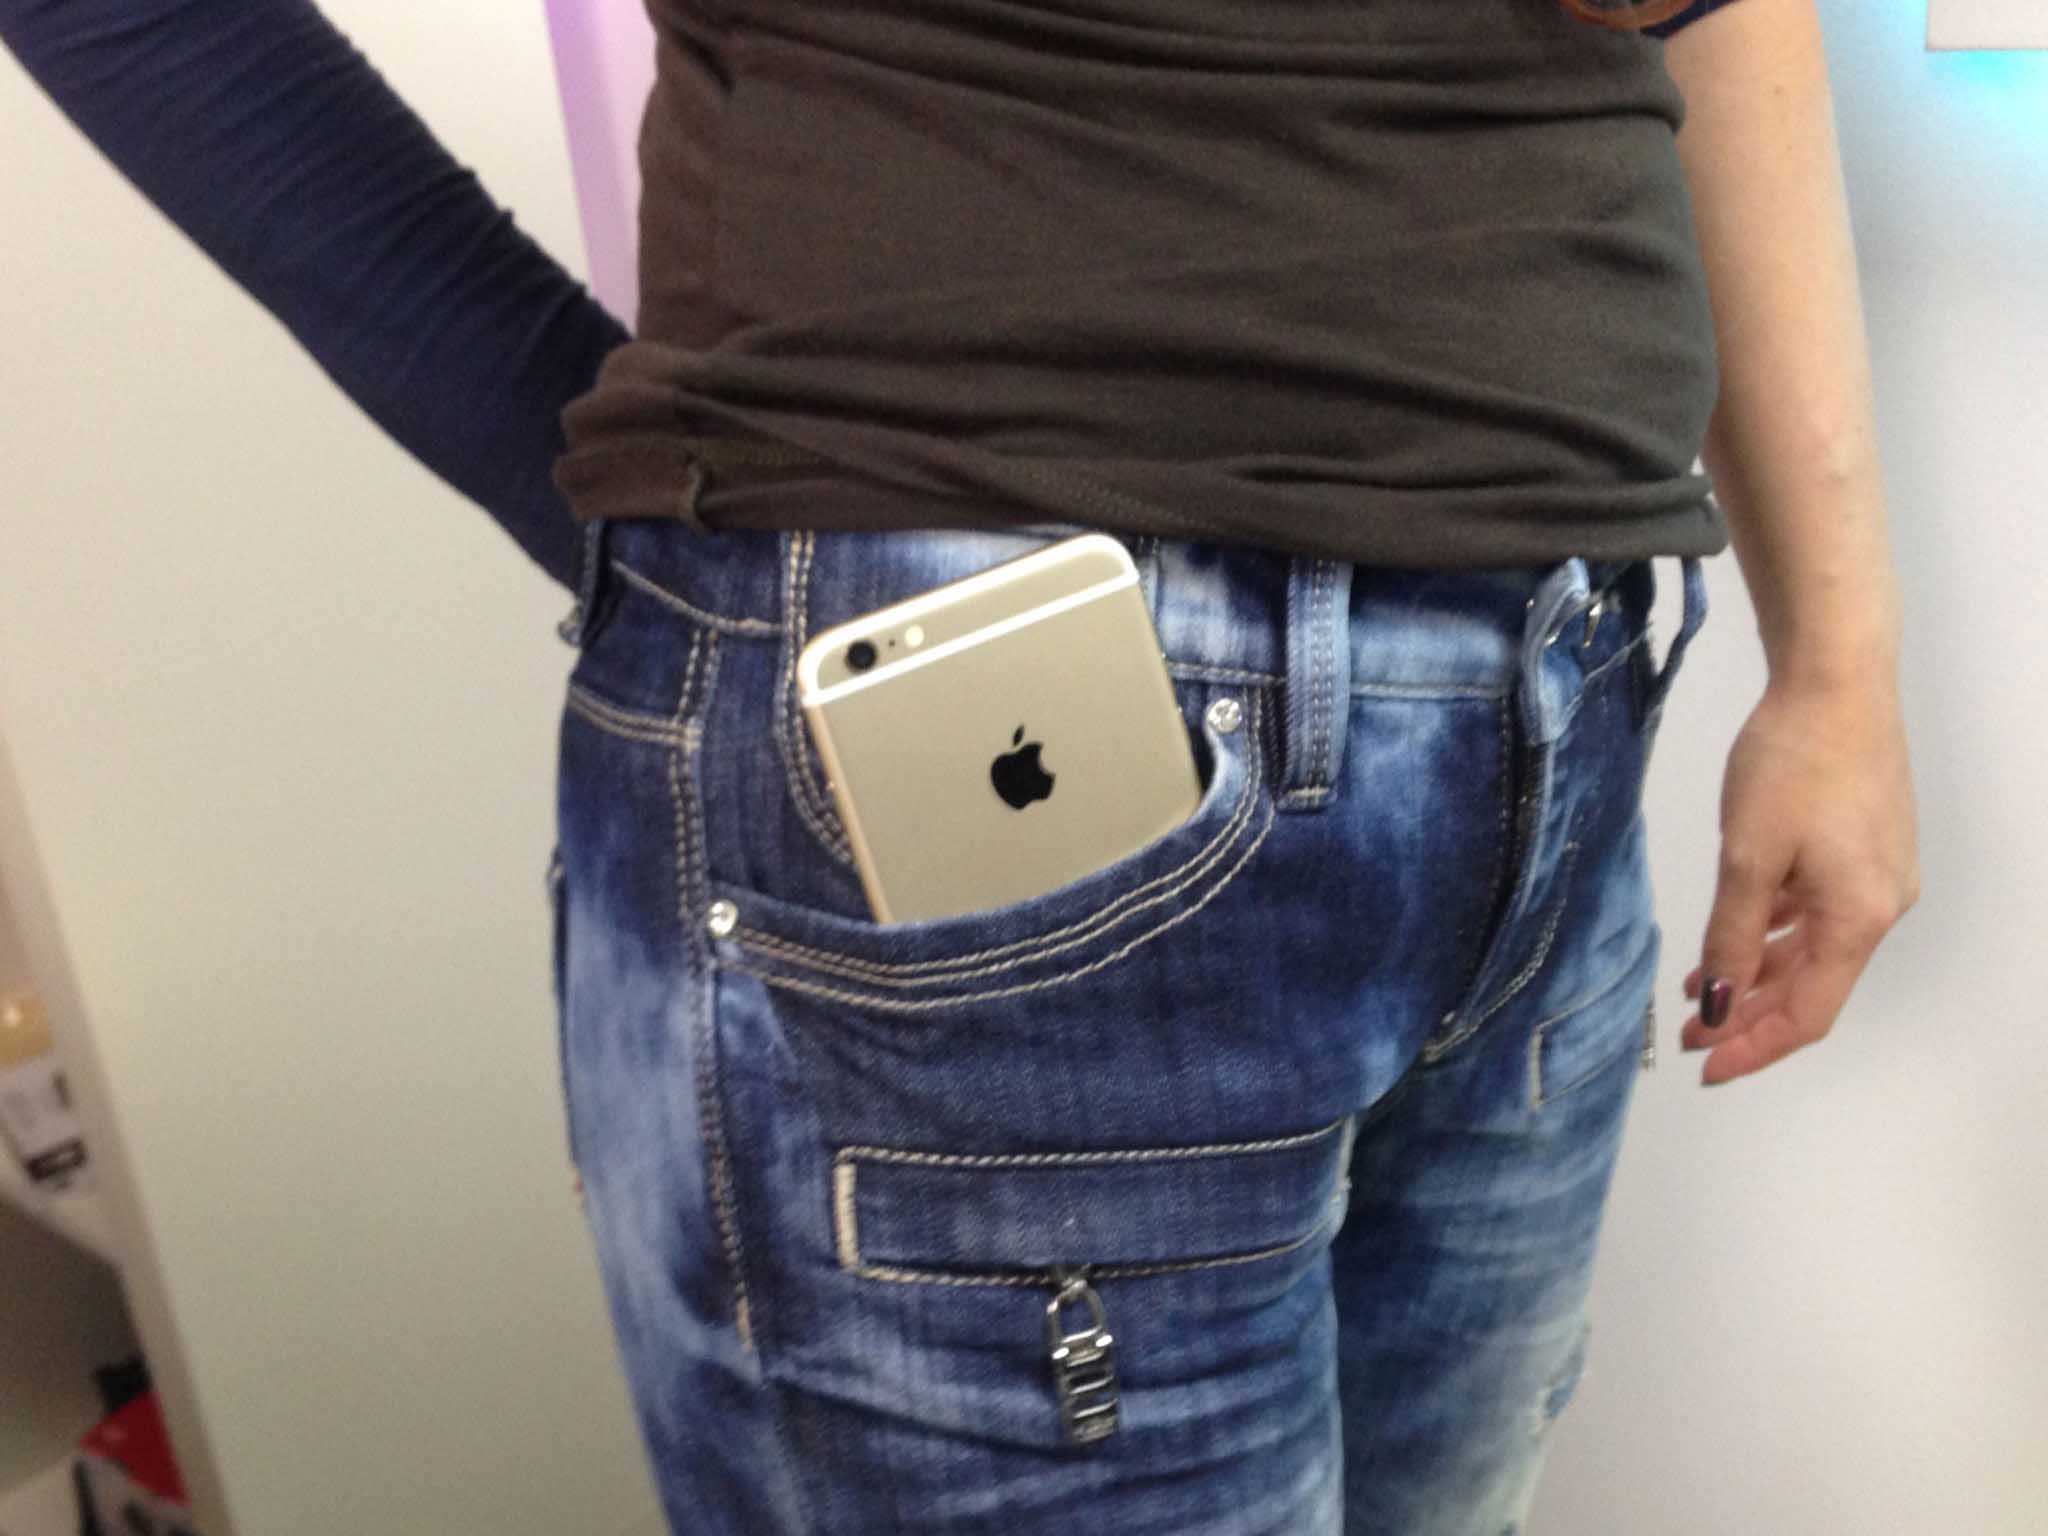 iPhone 6 Plus in front pocket